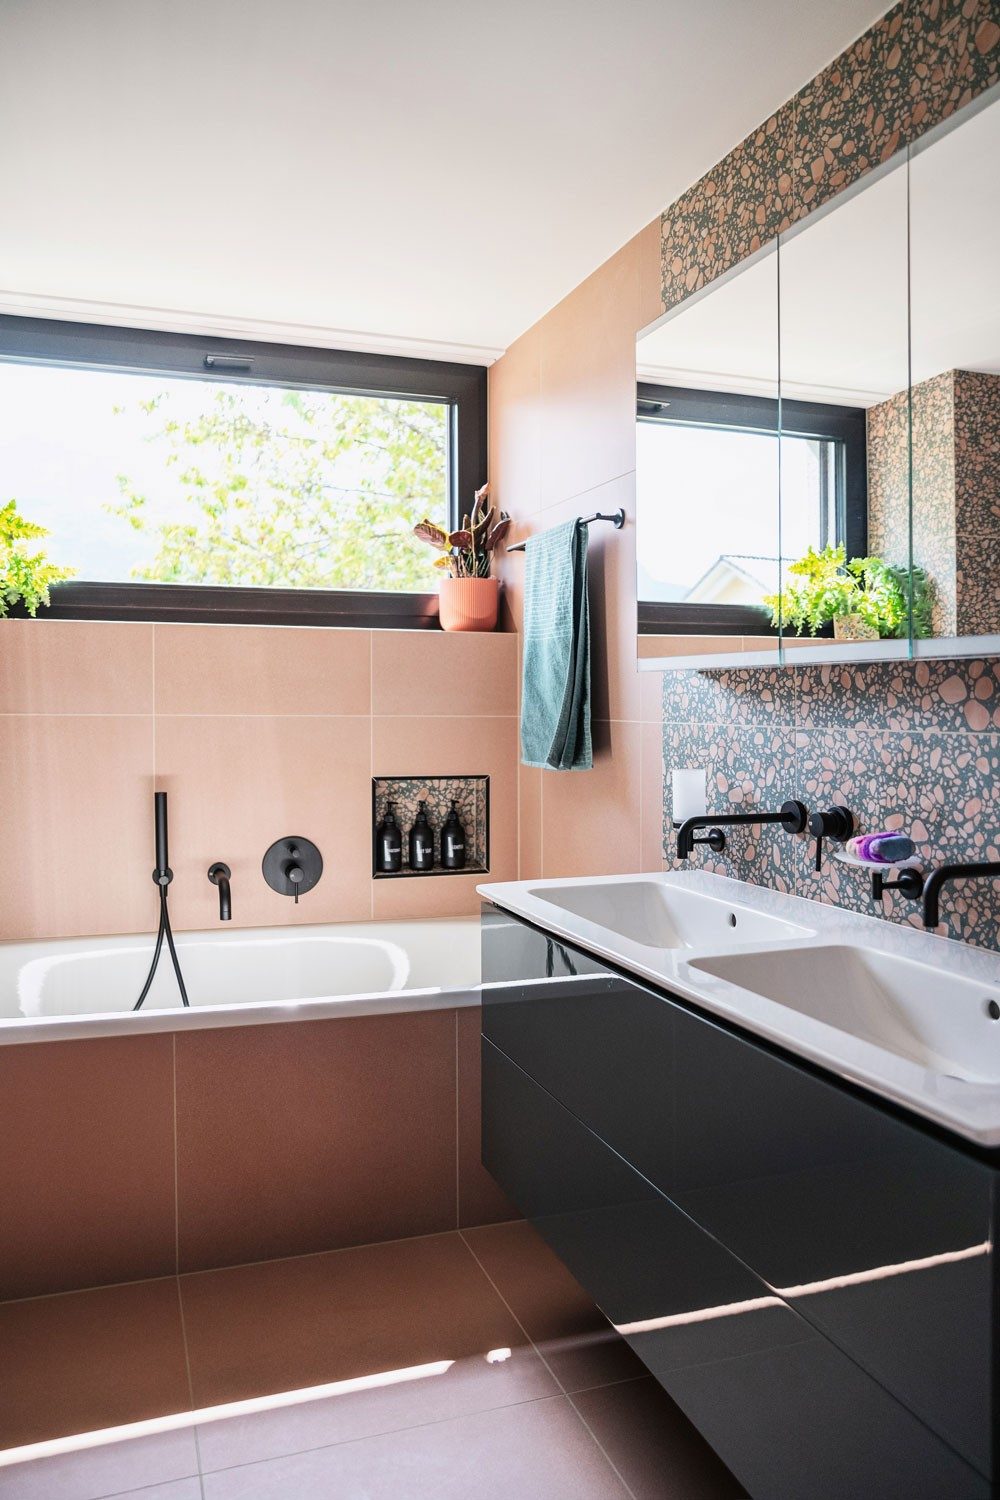 A bathroom with pink tiles and a black washbasin cabinet.